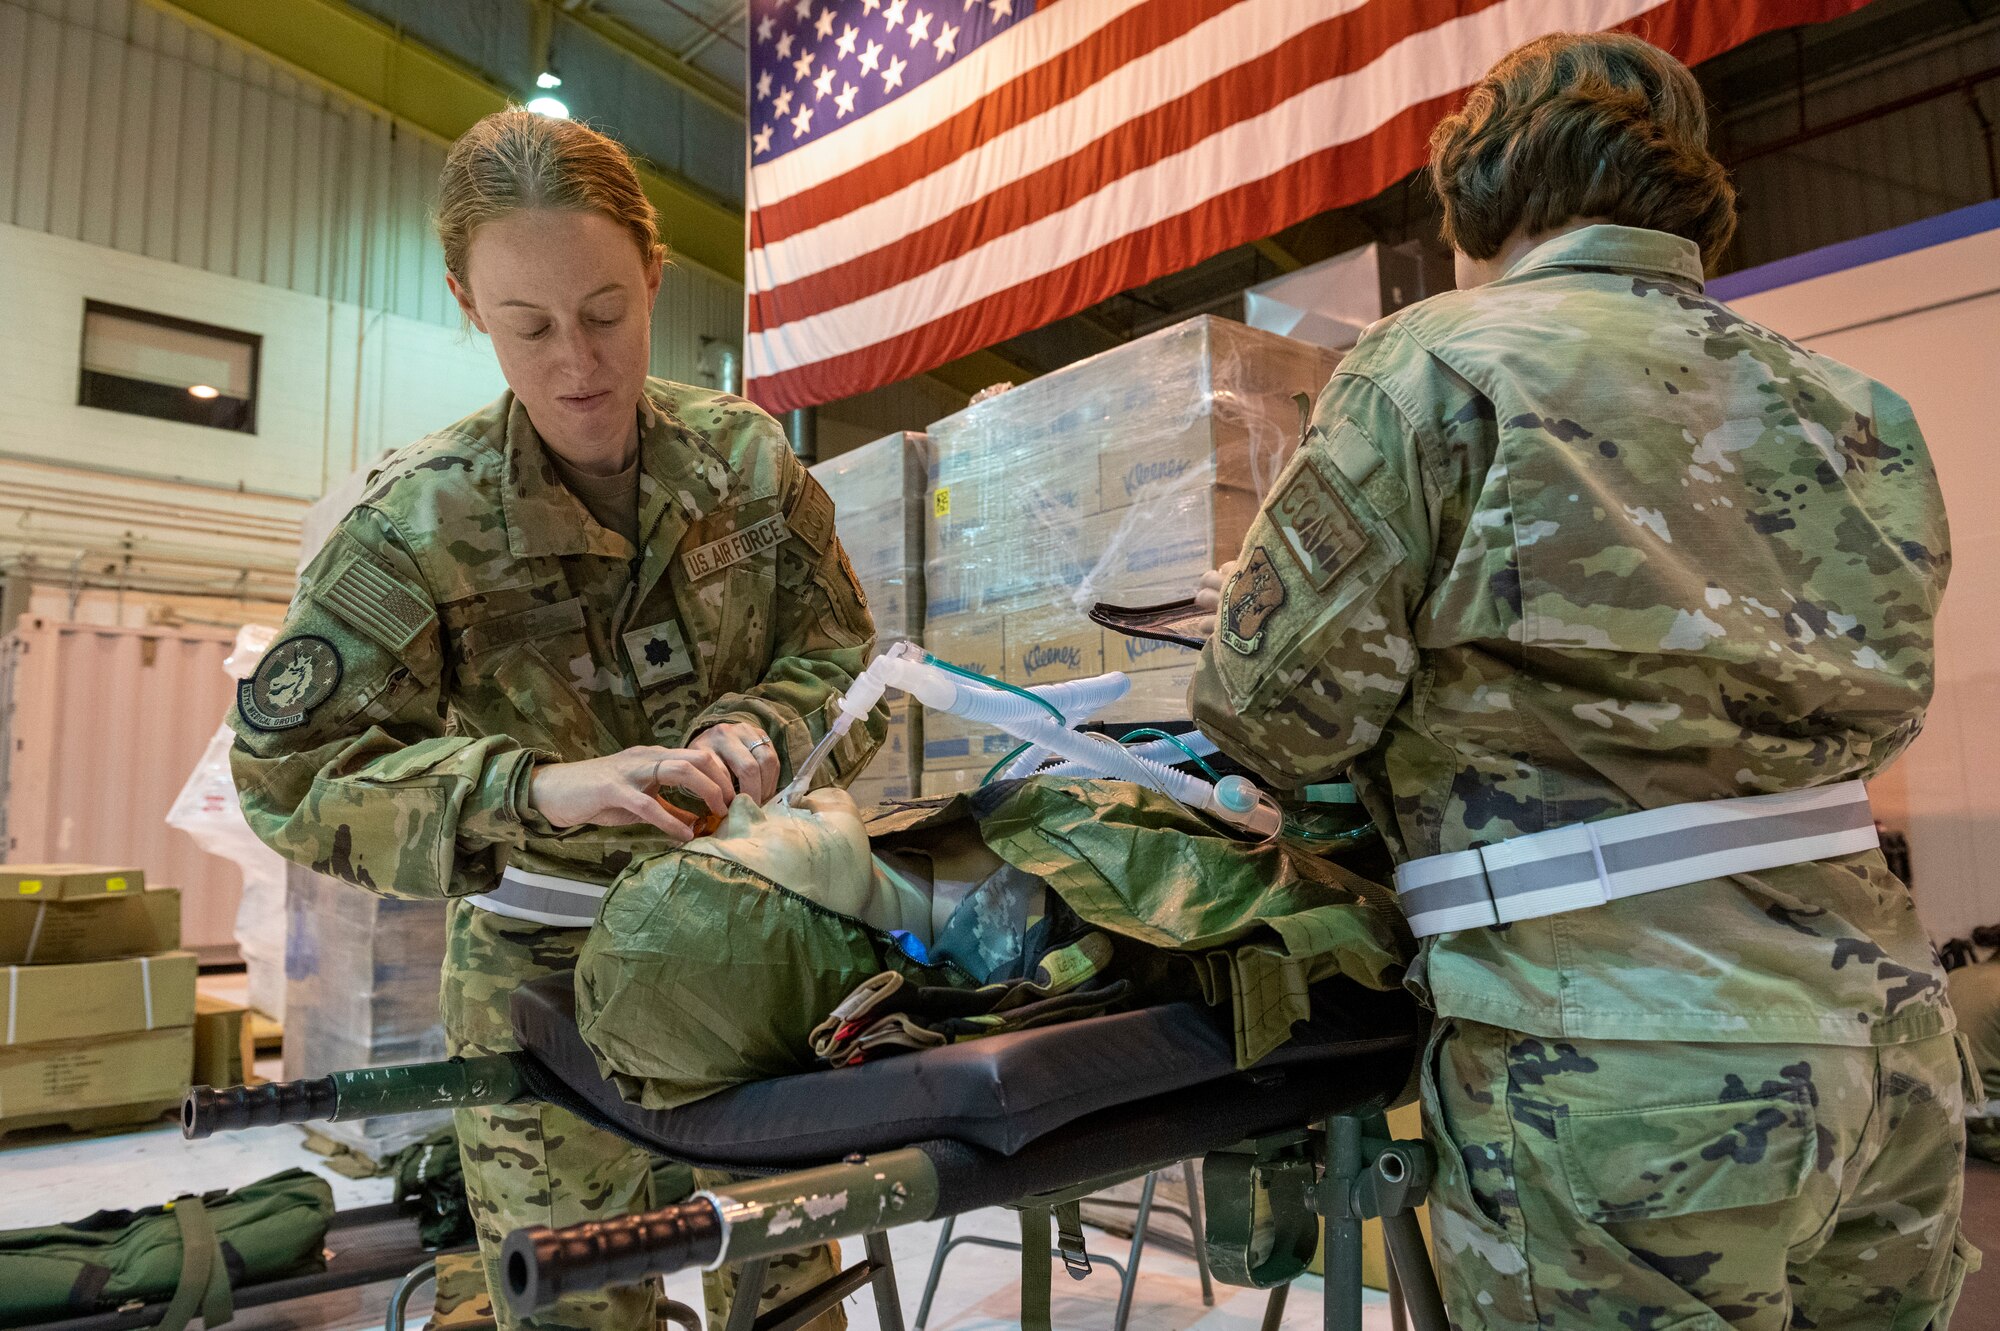 U.S. Air Force Lt. Col. Katie Ellis, 167th Medical Group critical care physician, and Lt. Col. Lori Wyatt, 167th Medical Group critical care nurse, conduct a preflight assessment of a simulated patient during a readiness exercise at the 167th Airlift Wing, Martinsburg, West Virginia, Aug. 11, 2023.